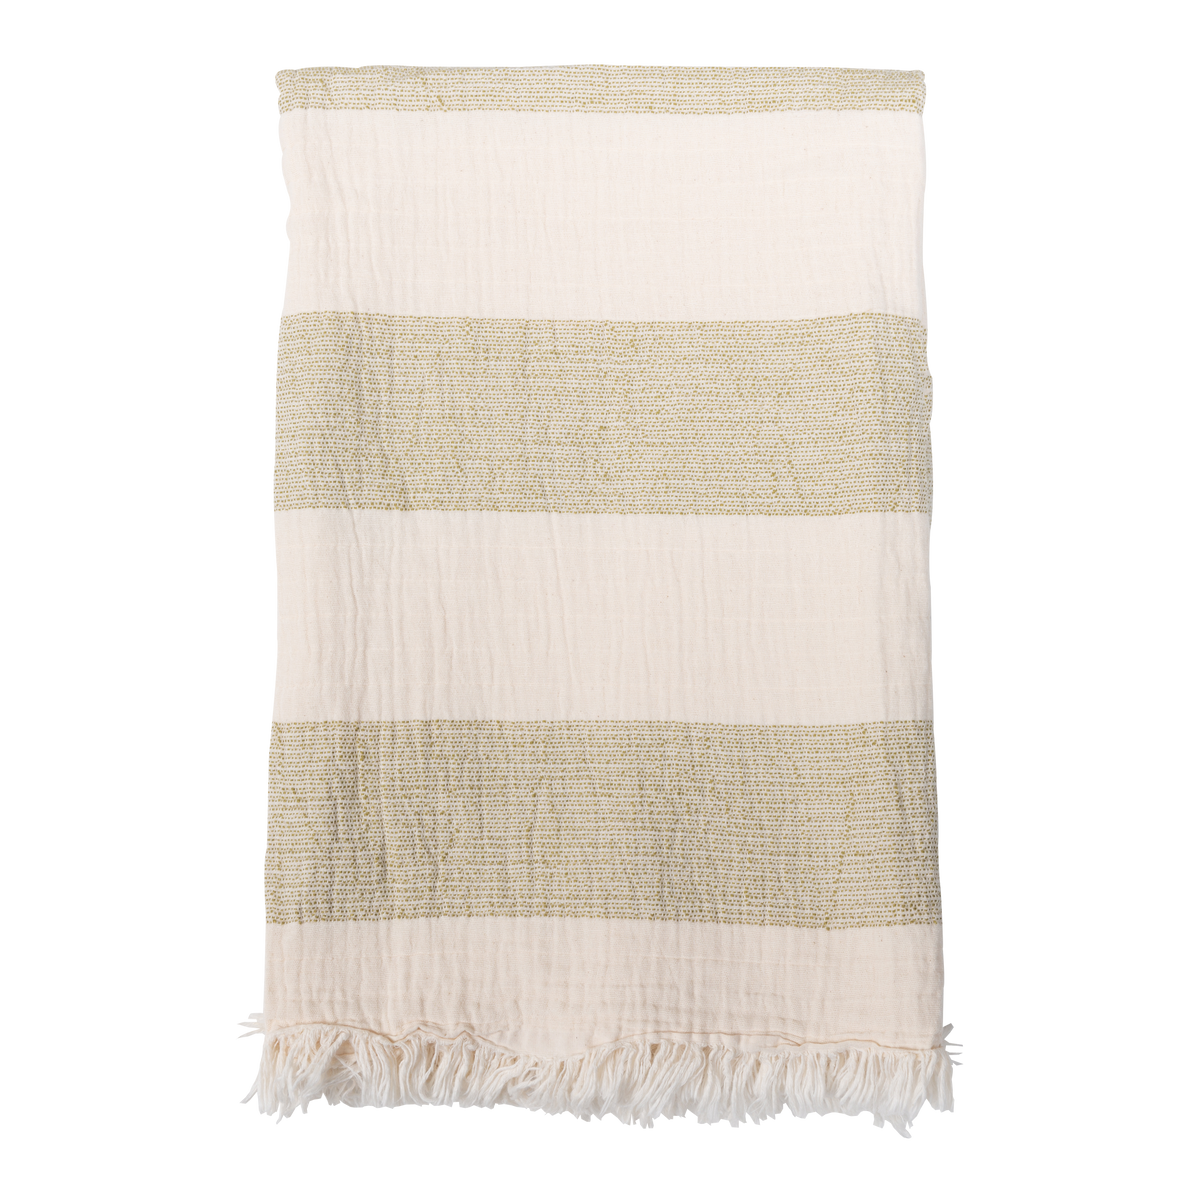 Characterized by its lightweight gauzy texture and its stitched detailing, the Stripe Cotton Gauze Throw is made of a cotton/linen blend that adds exceptional softness and a welcom